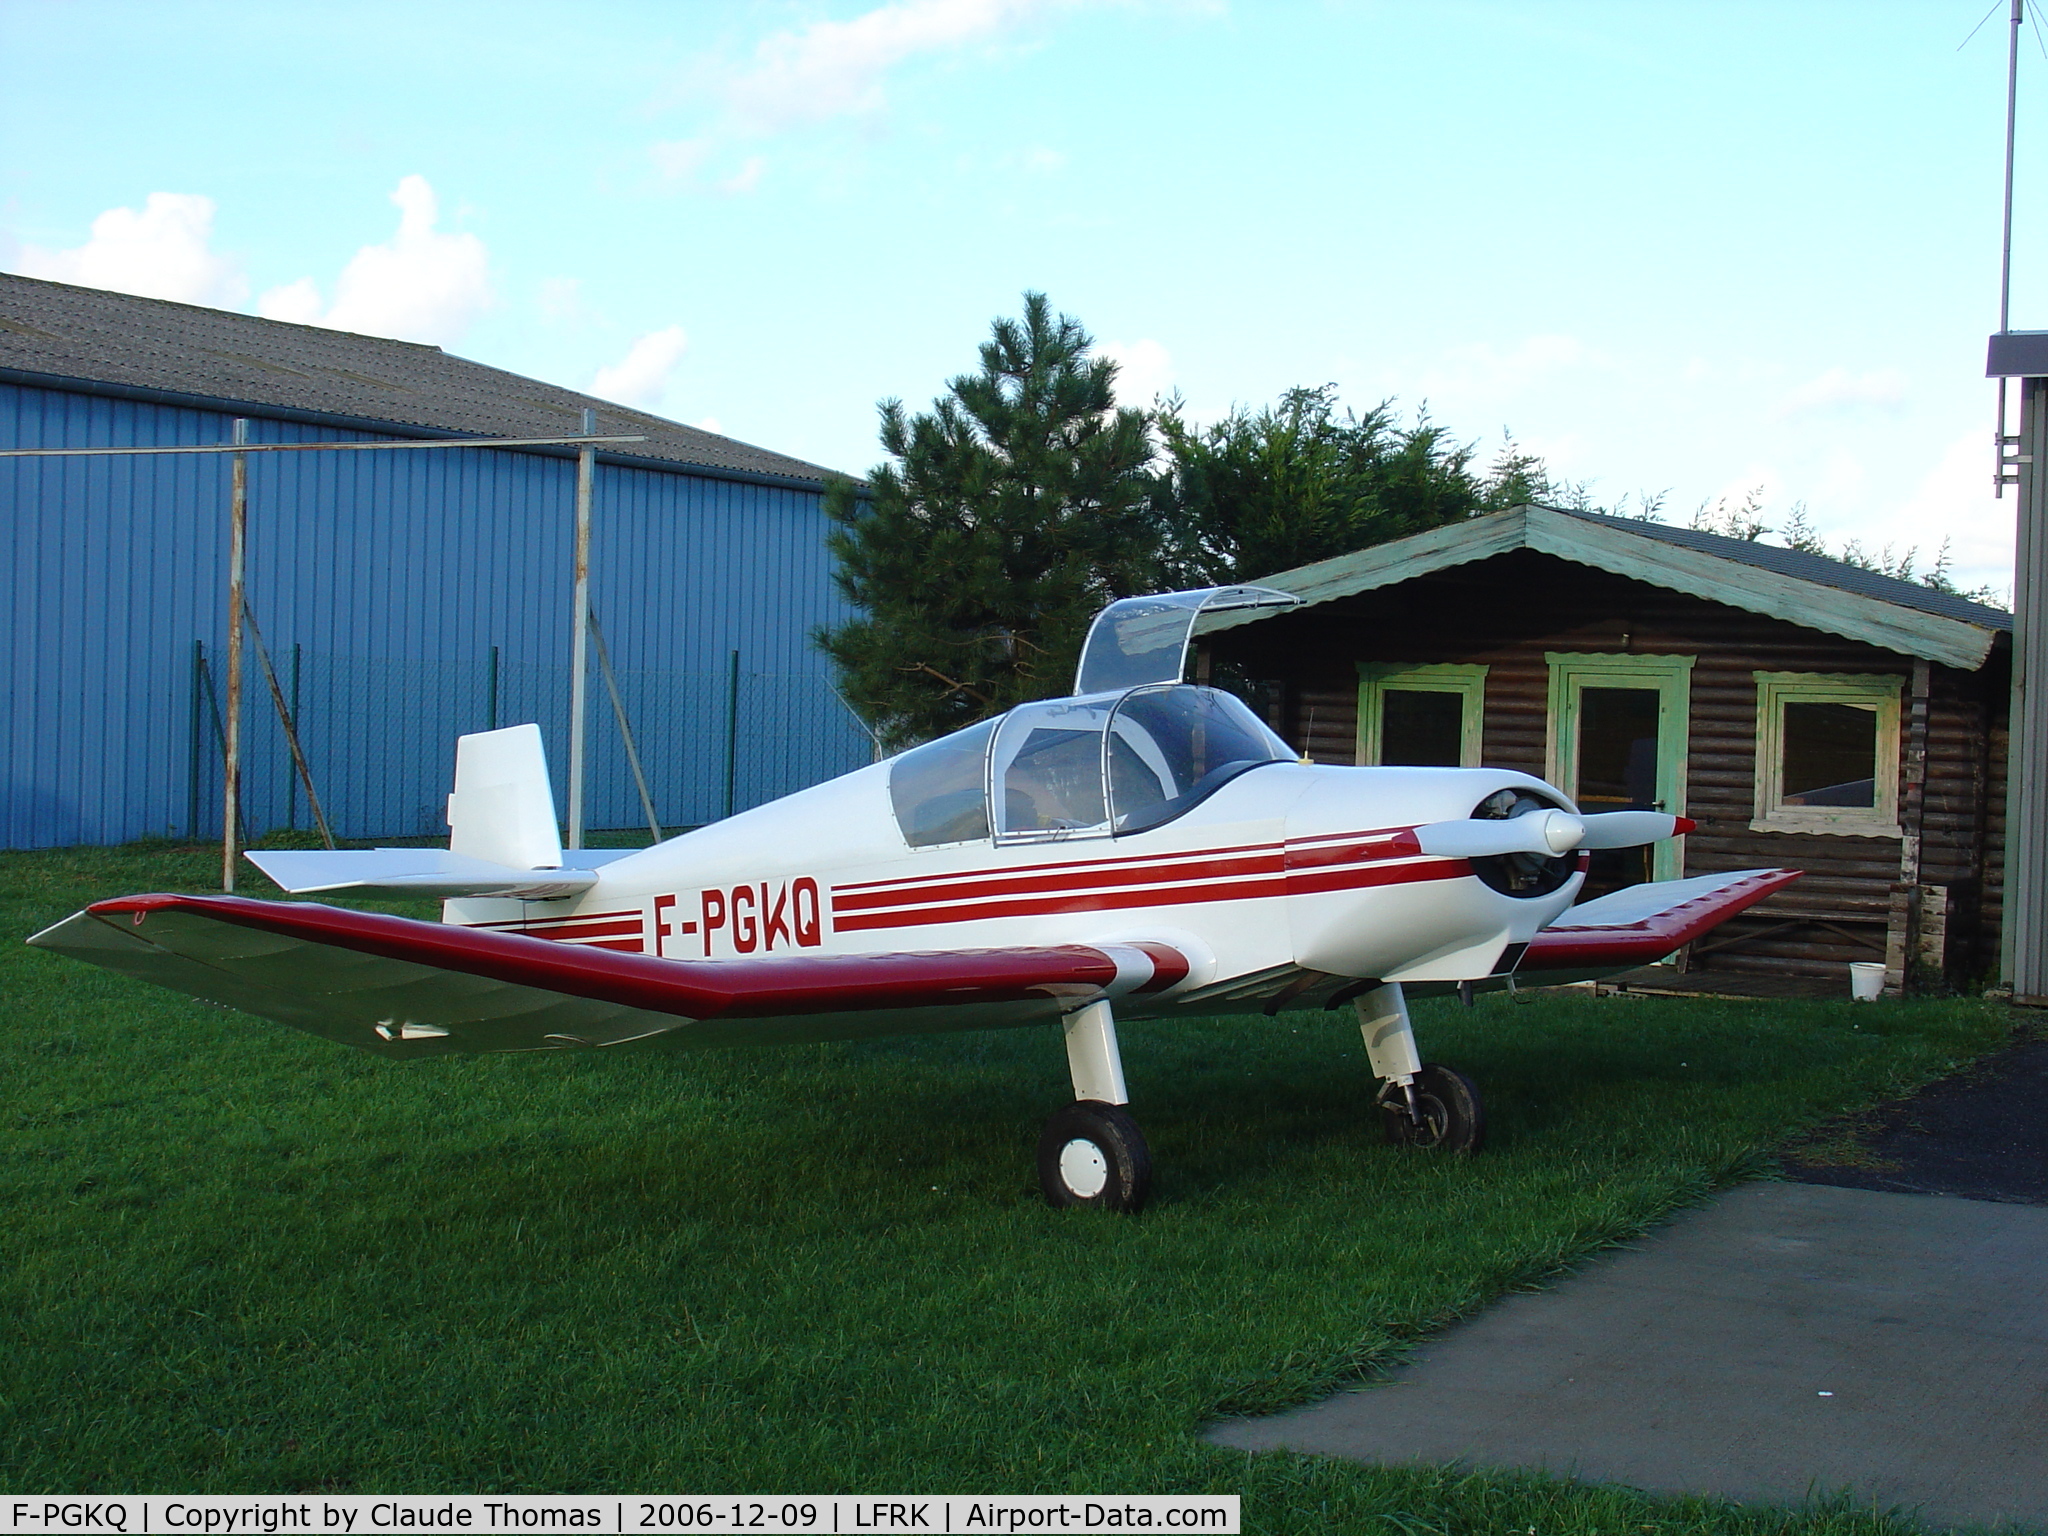 F-PGKQ, Jodel D-112 C/N 108, In front of the clubhouse of 